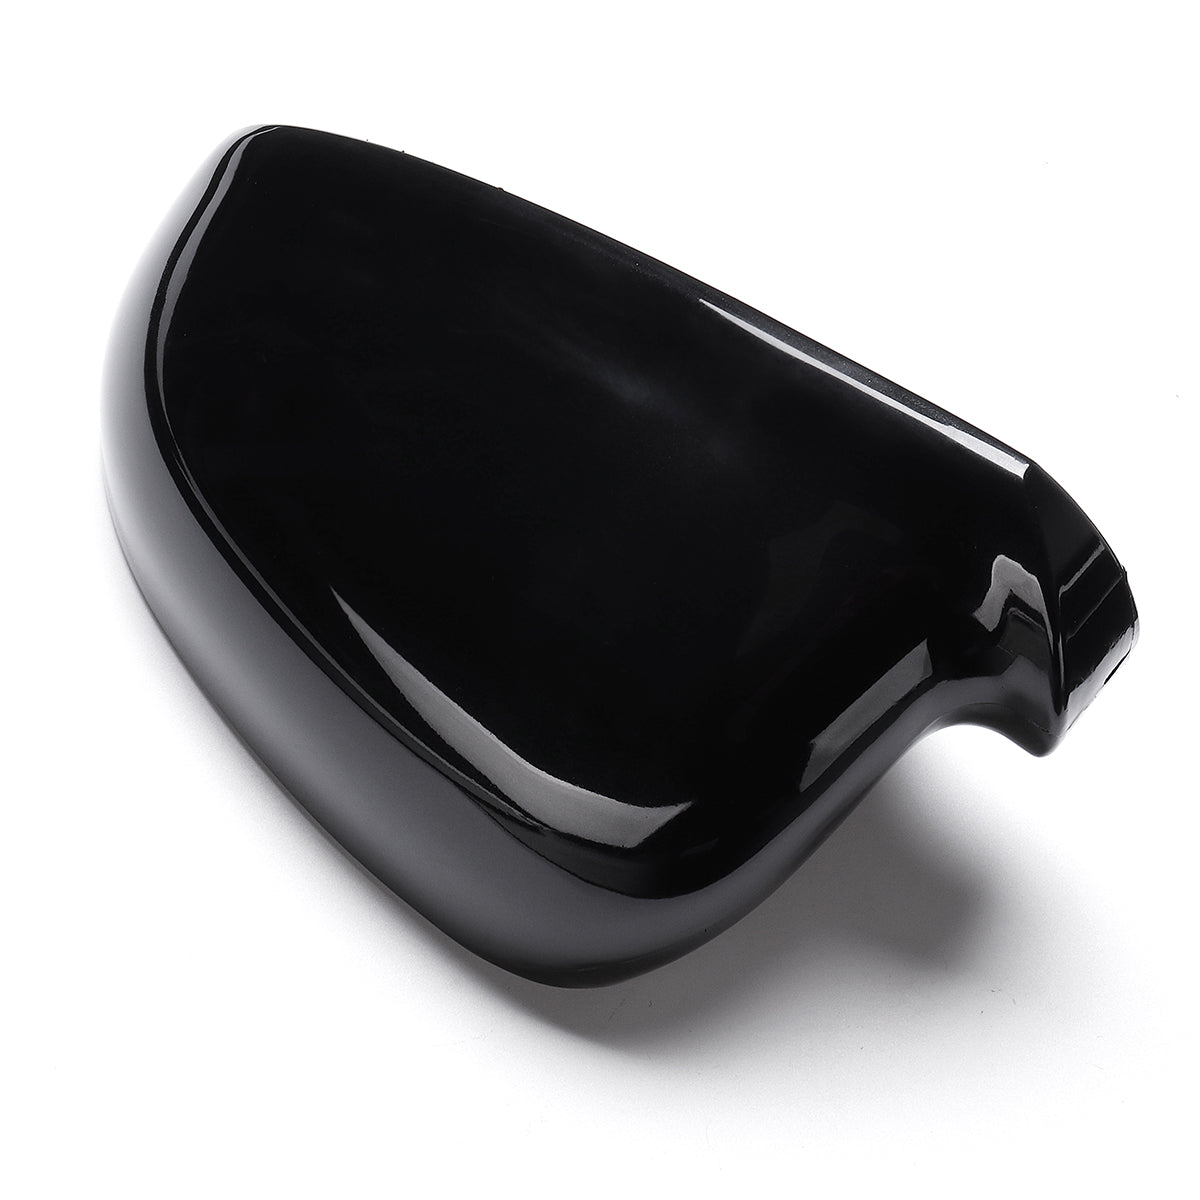 Pair Car Front Wing Side Mirror Cover Housing Black Cap For VW Jetta Golf MK5 Eos for SKODA for SEAT - Auto GoShop